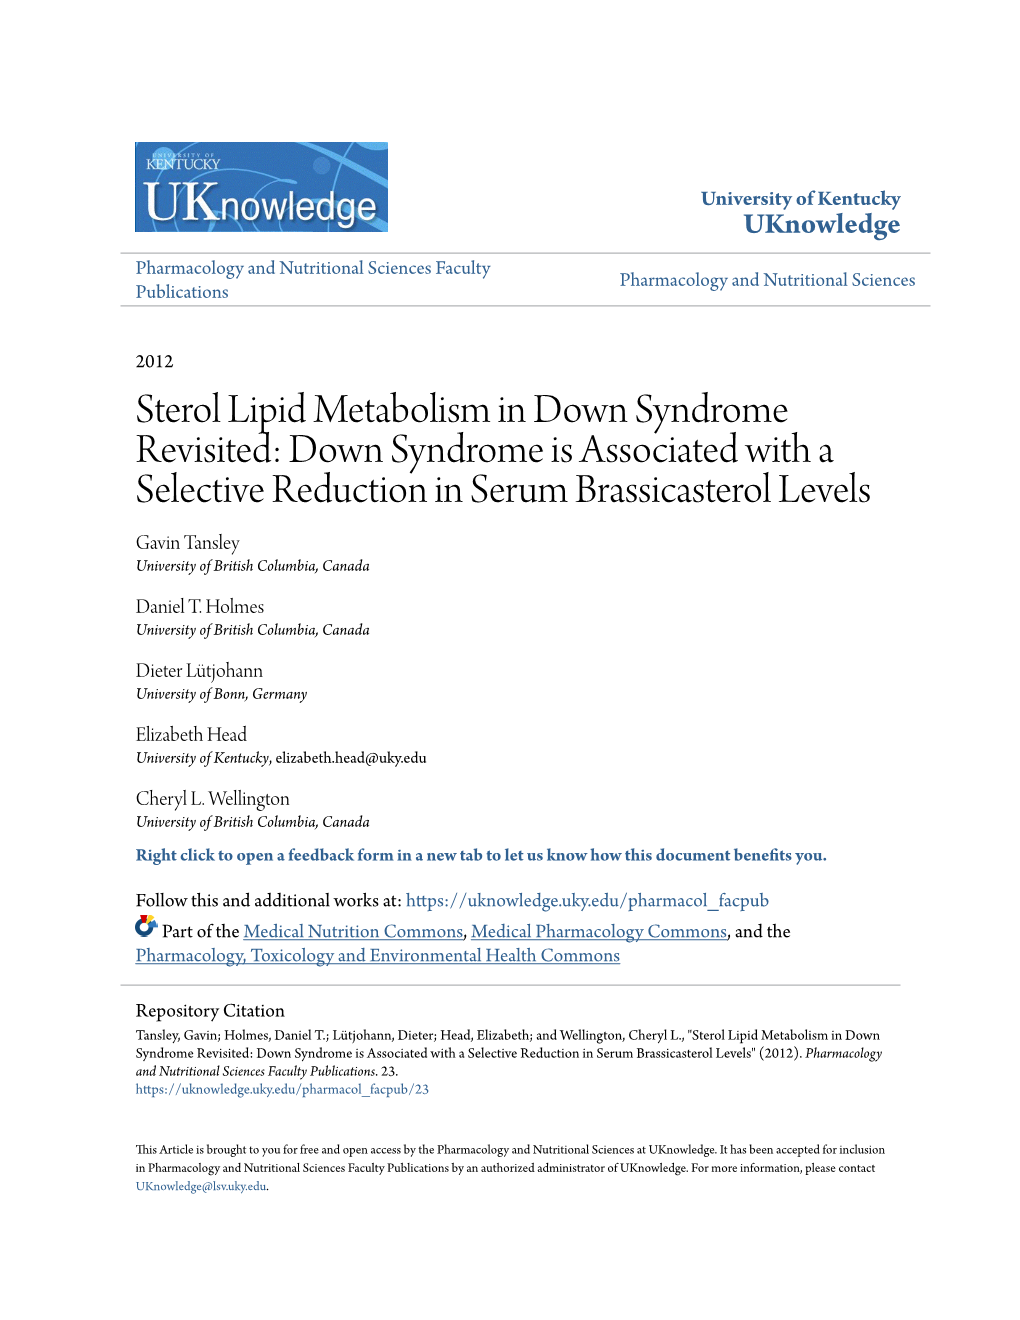 Sterol Lipid Metabolism in Down Syndrome Revisited